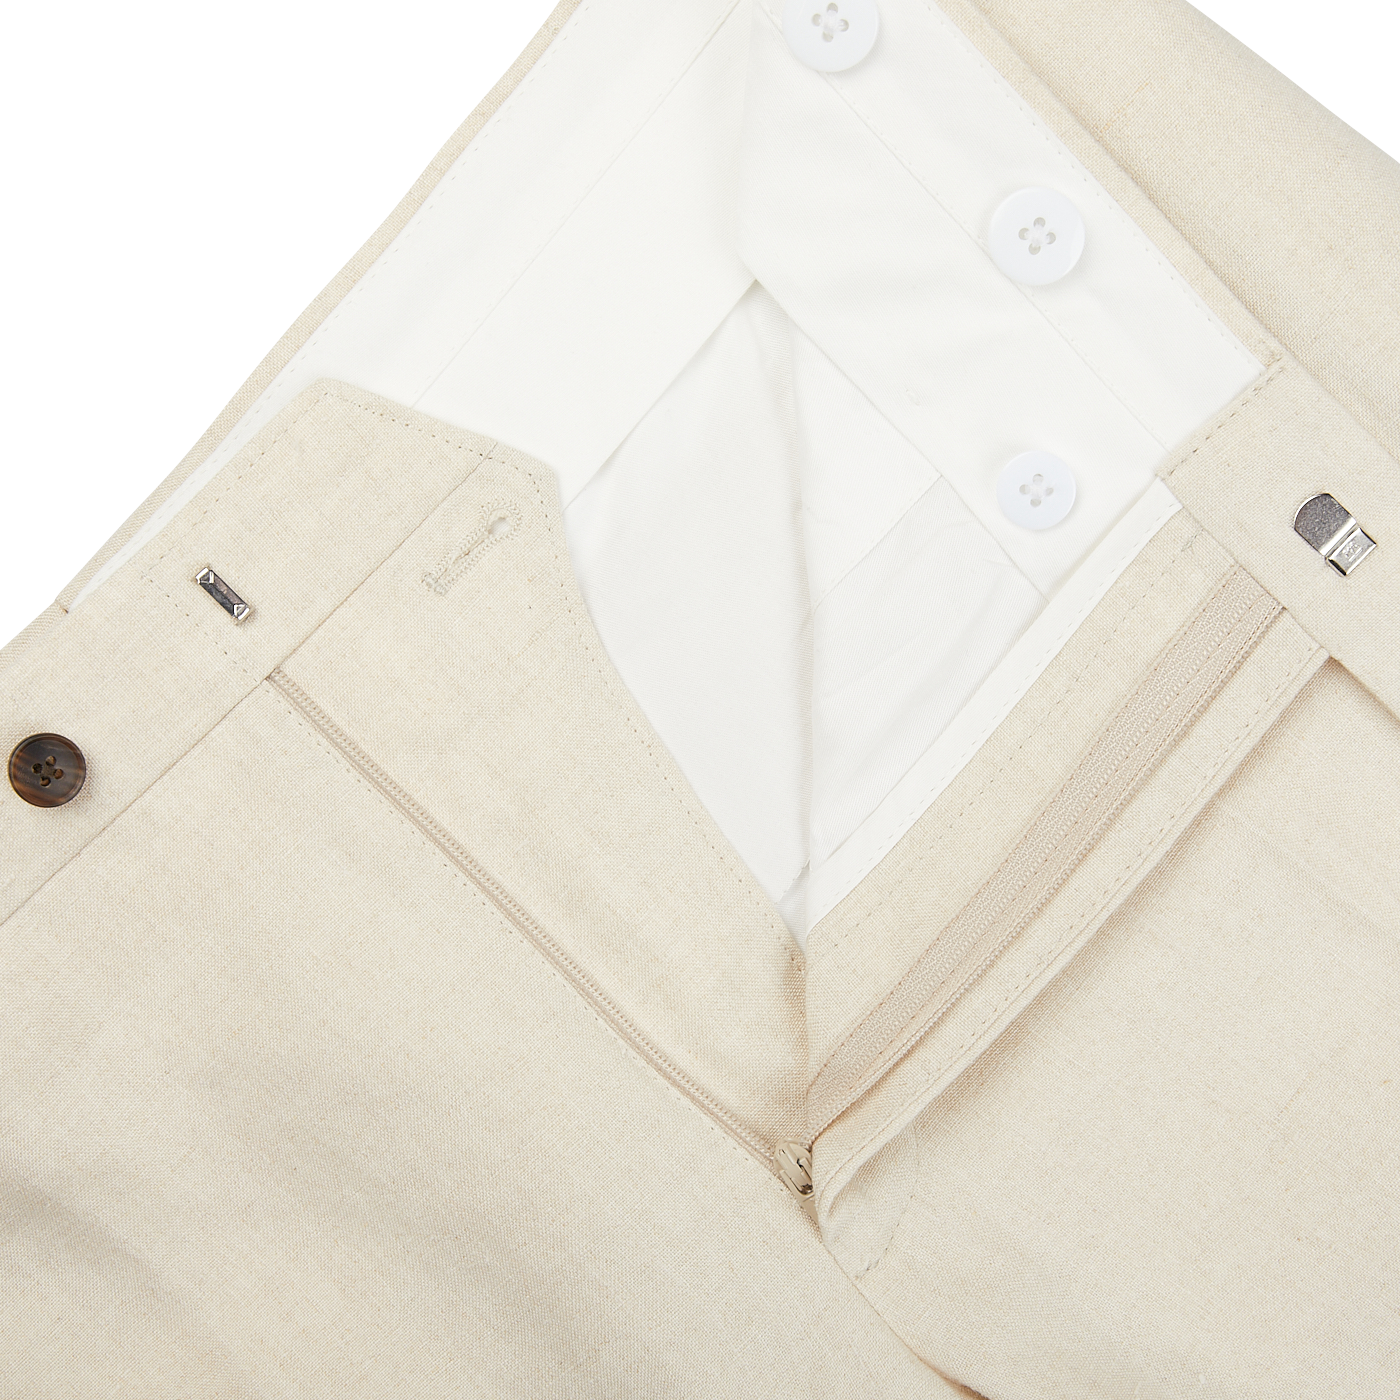 A close up of Light Beige Pure Linen Flat Front Trousers from Baltzar Sartorial with buttons and a tailored fit.